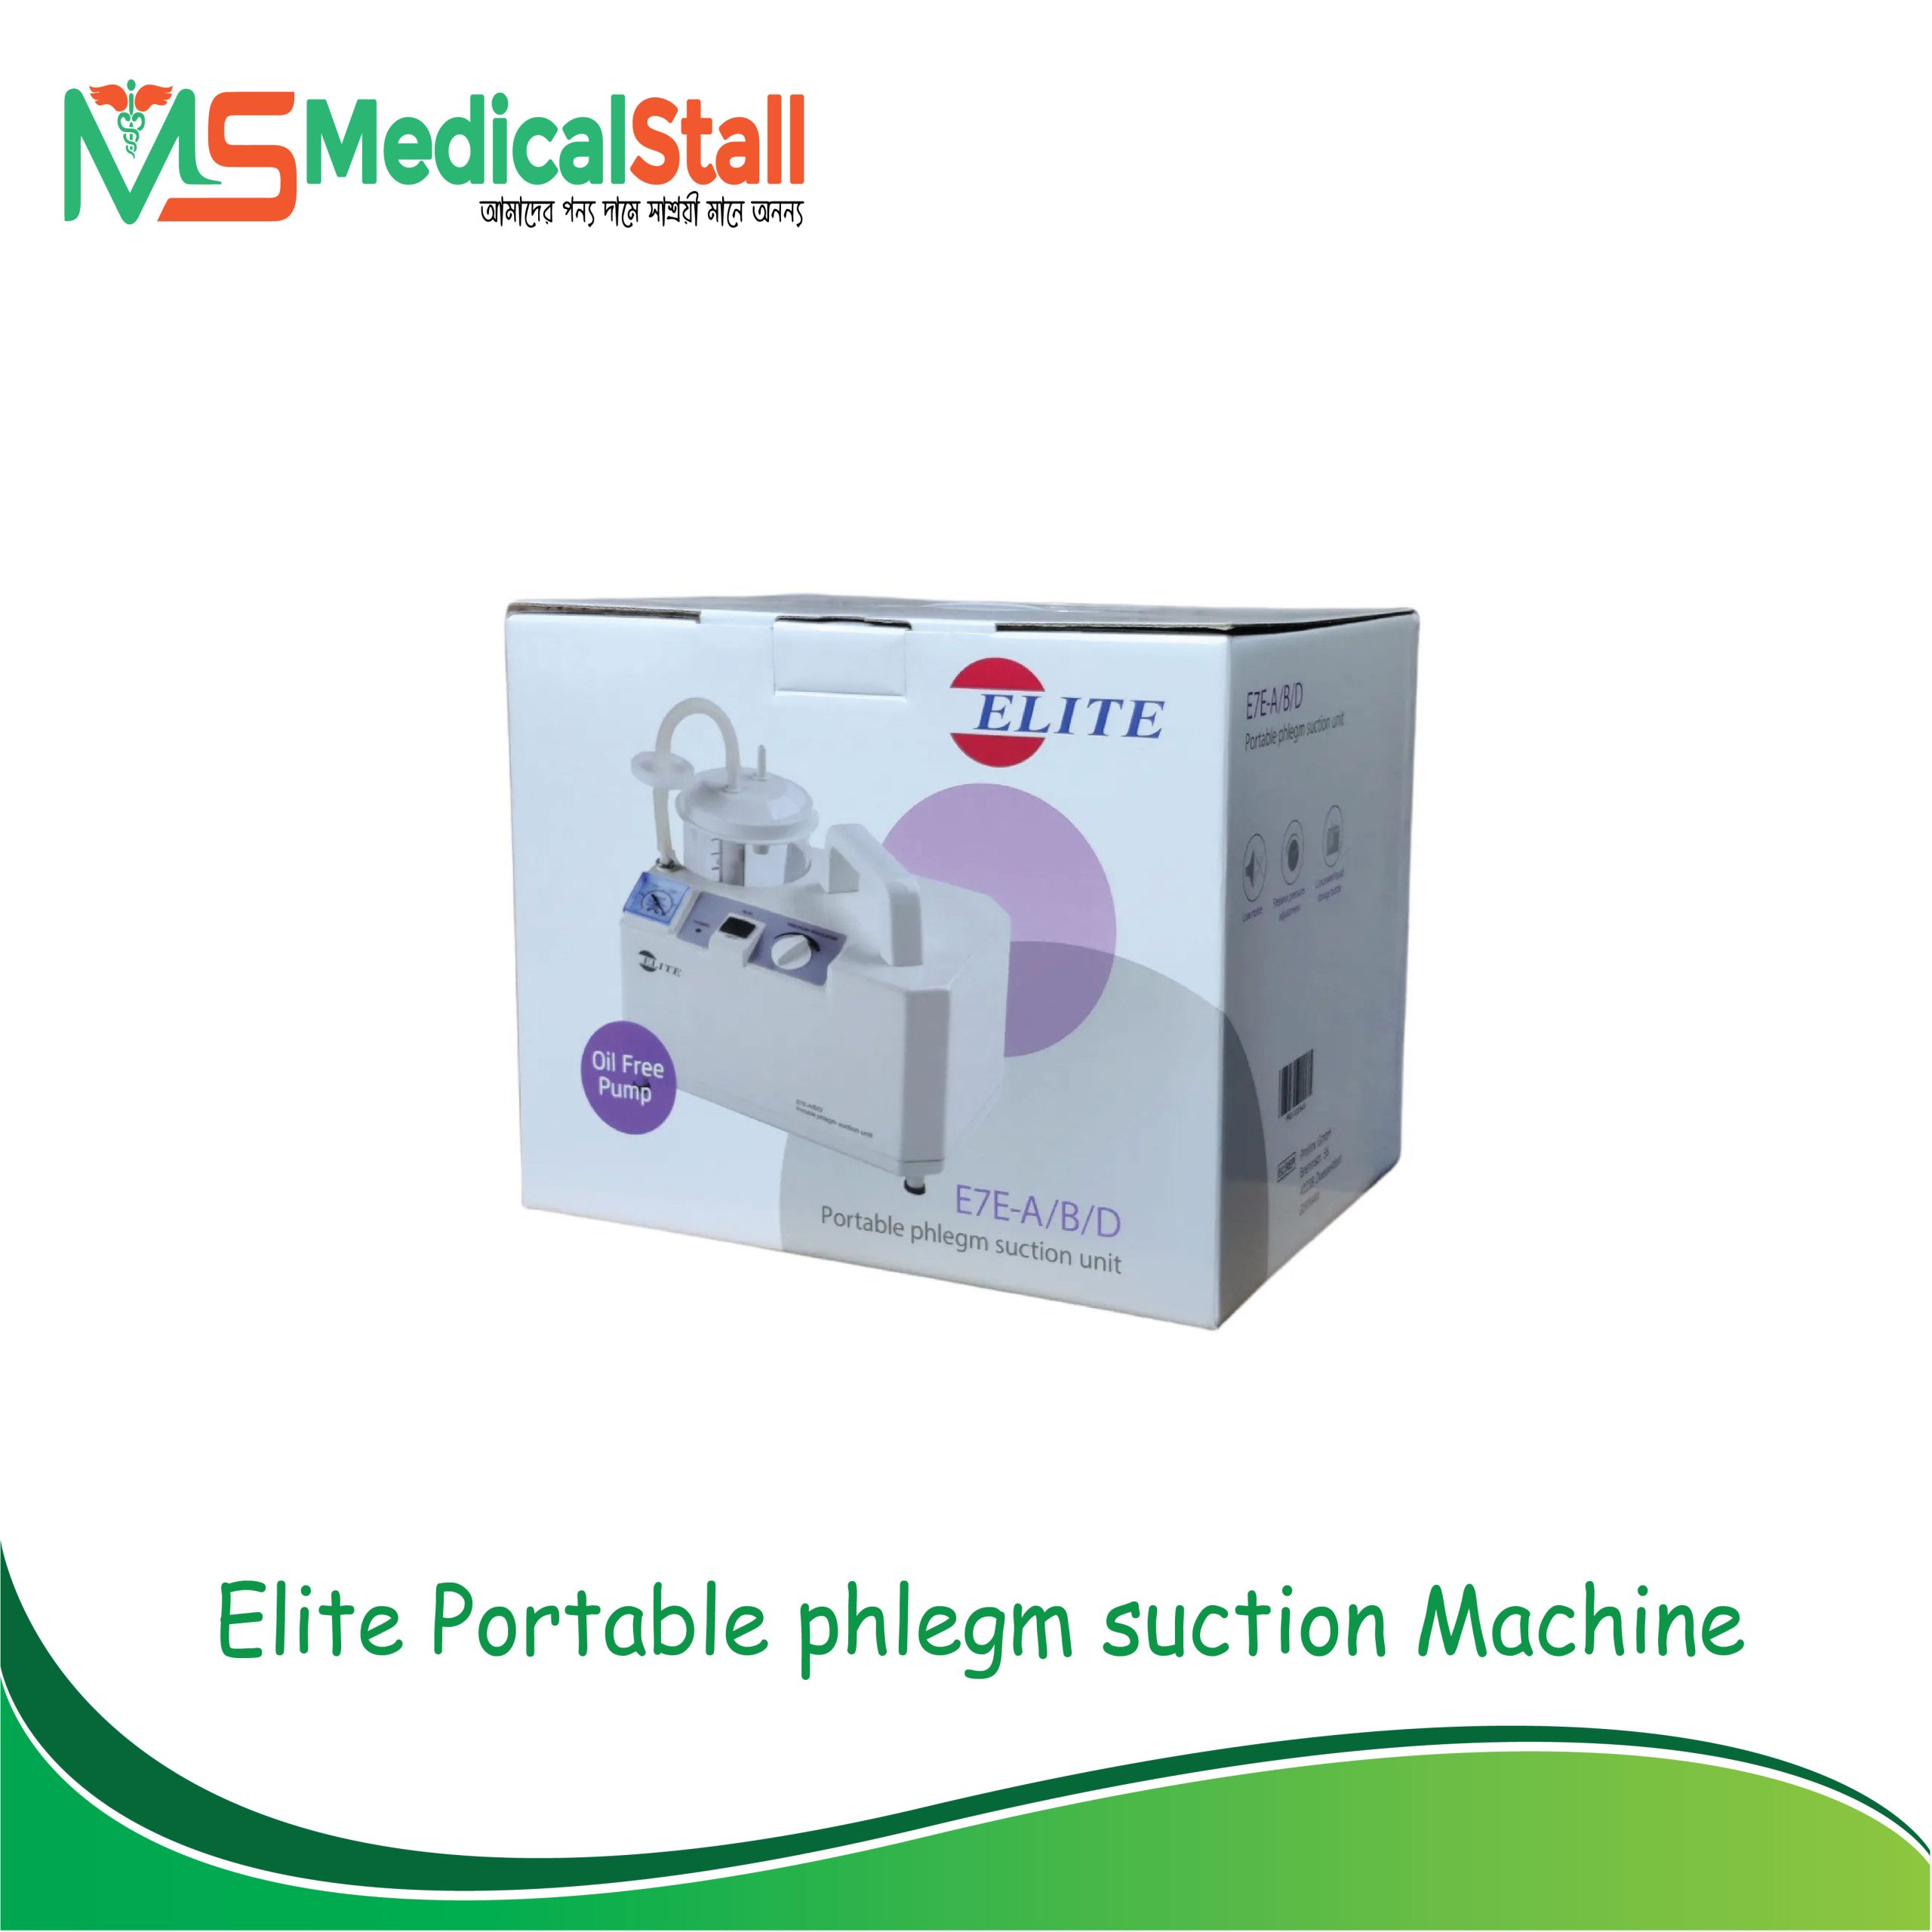 Best Quality Elite Portable Suction Machine in Reasonable in BD